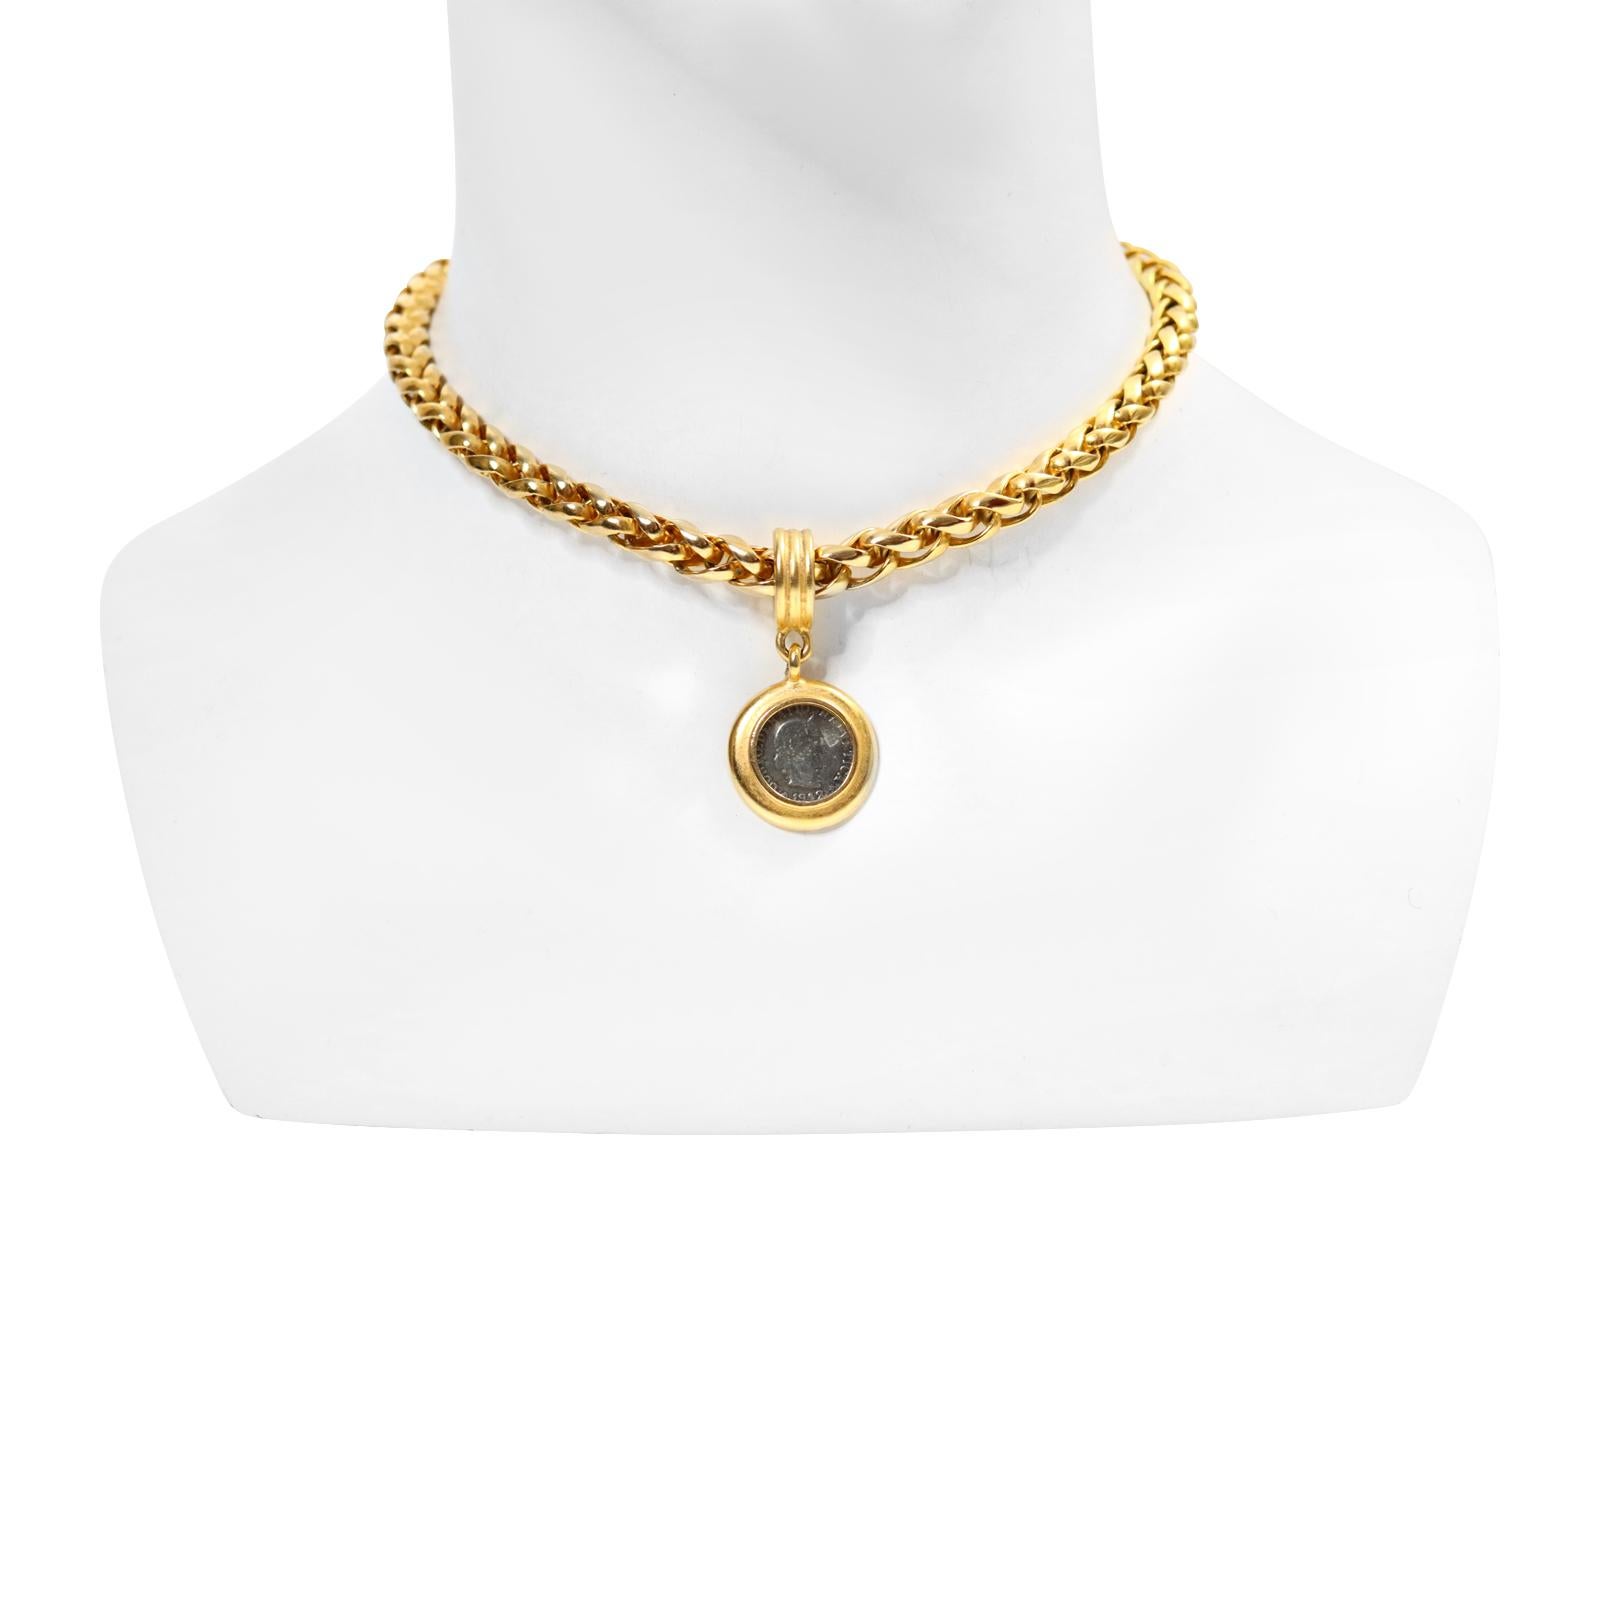 Vintage Carolee Gold Chain and Dangling Coin Necklace Circa 1990s. This is a heavy and well made braided chain with a silver tone coin encased in the gold tone which looks great with the offset different metals.   This is a classic necklace that is